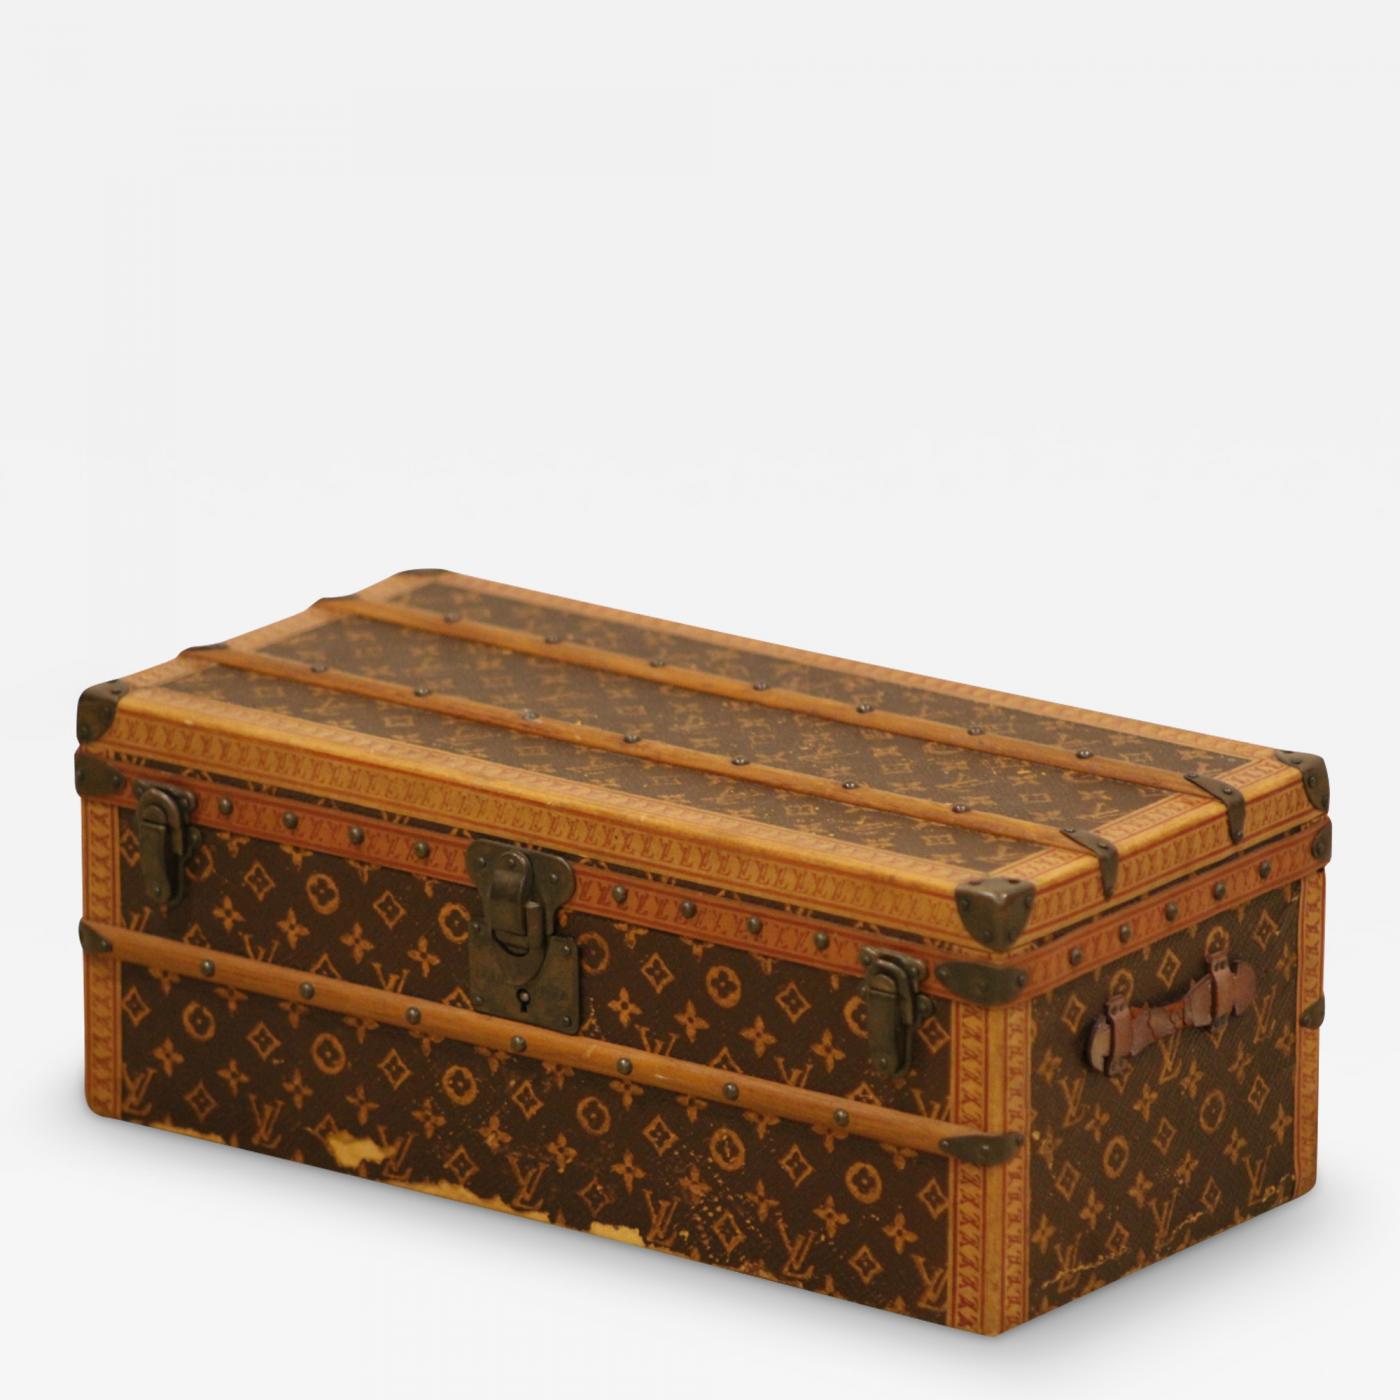 Flower trunk, special order from Louis Vuitton new